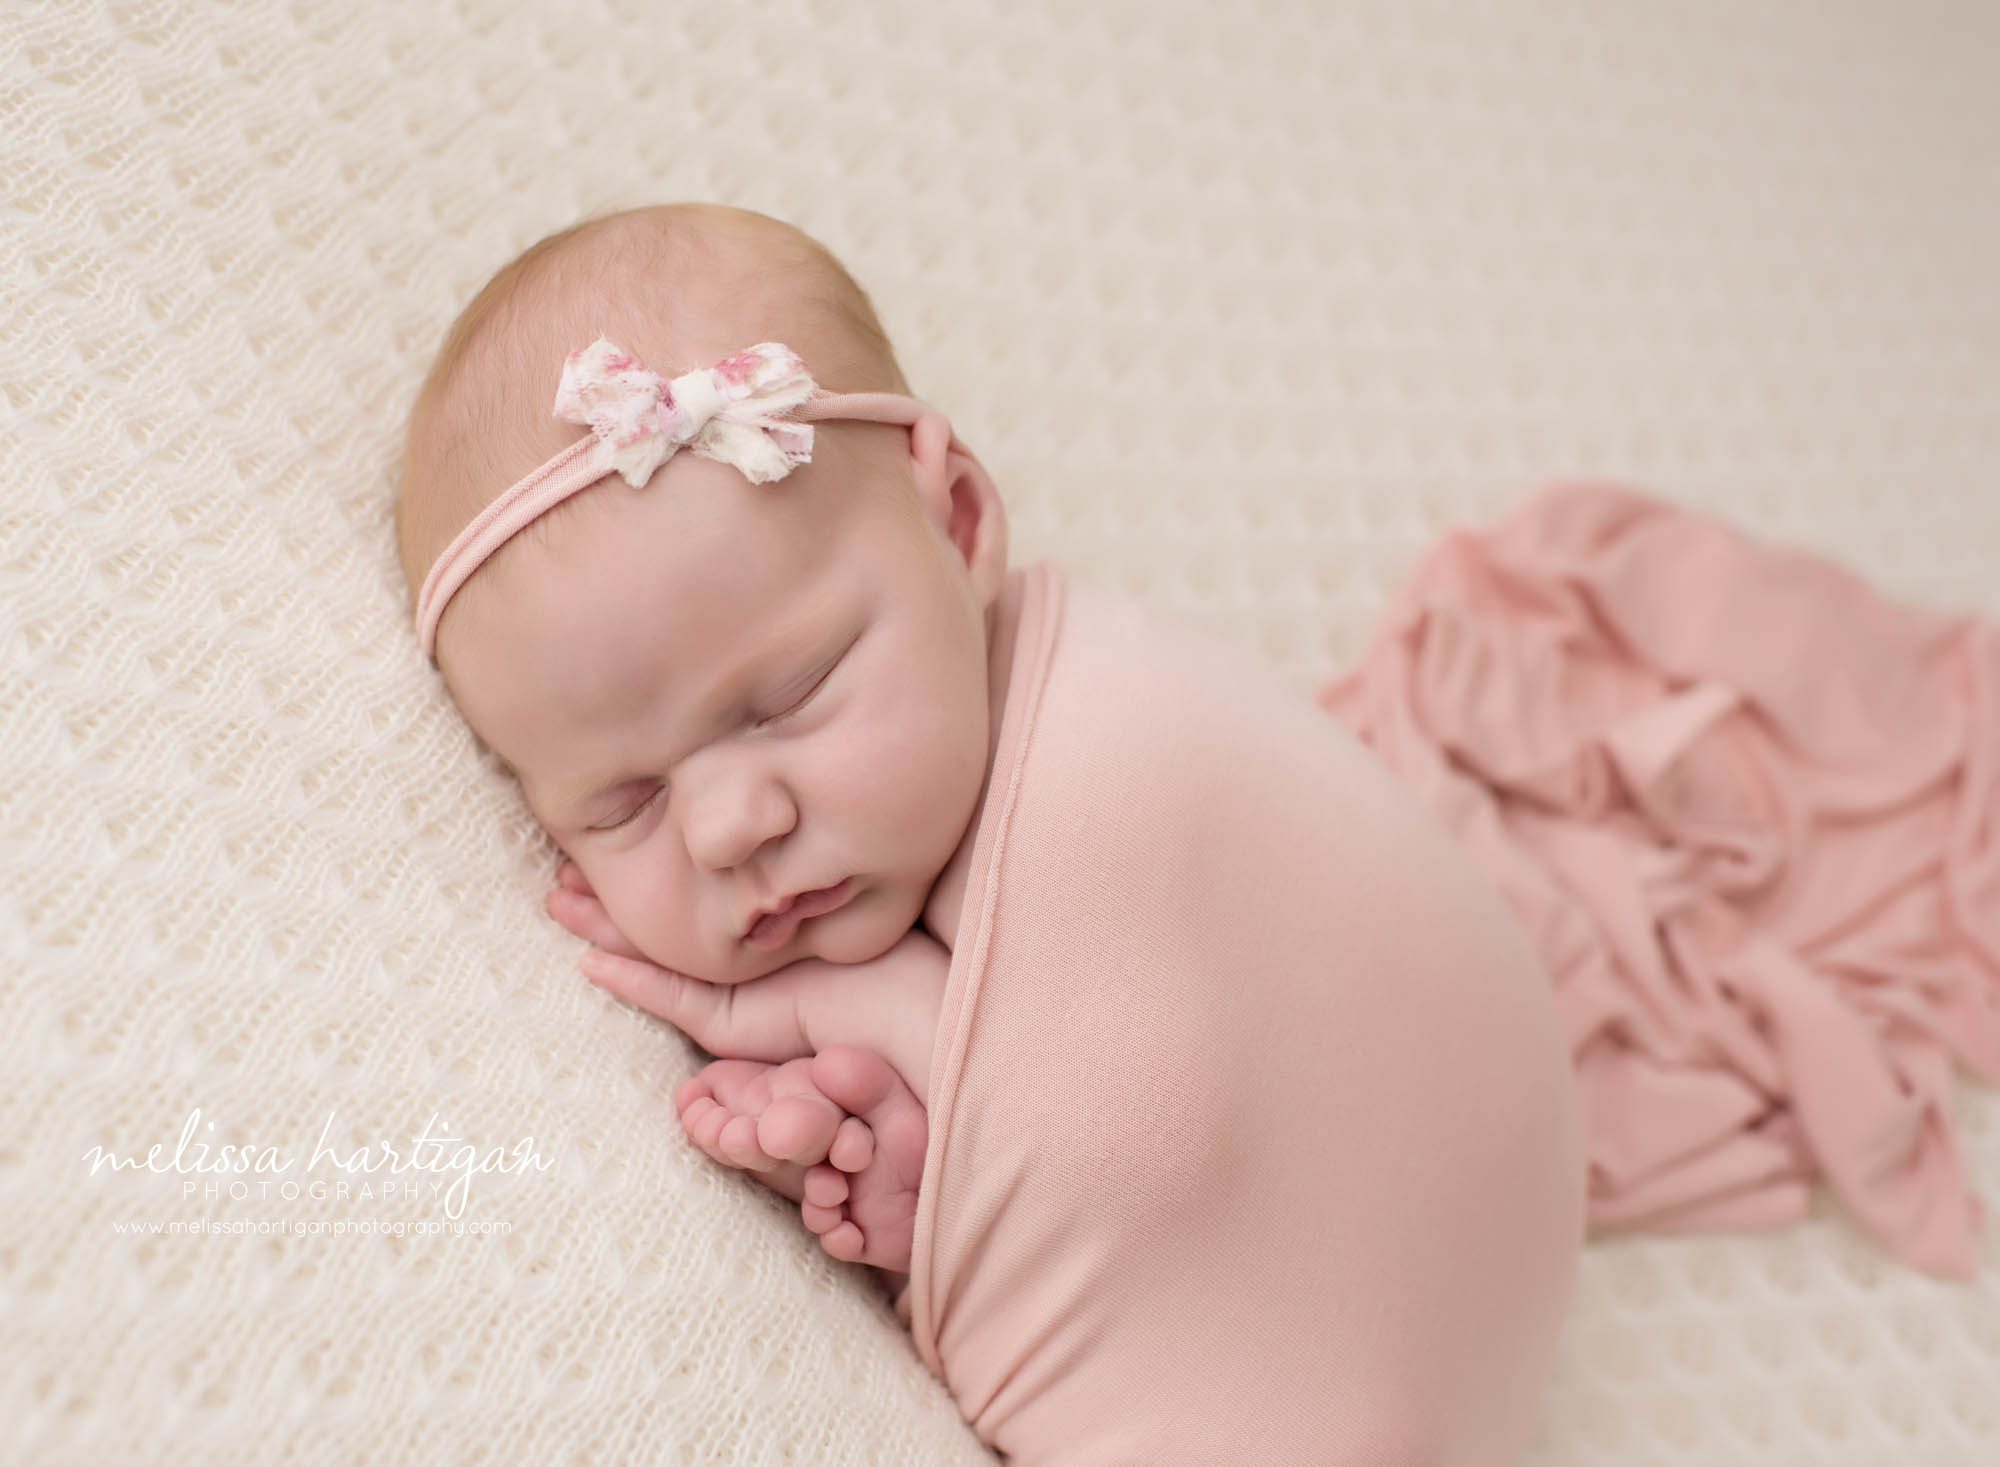 Melissa Hartigan Photography Connecticut Newborn Photographer in Coventry baby girl sleeping wrapped in pink with pink bow headband